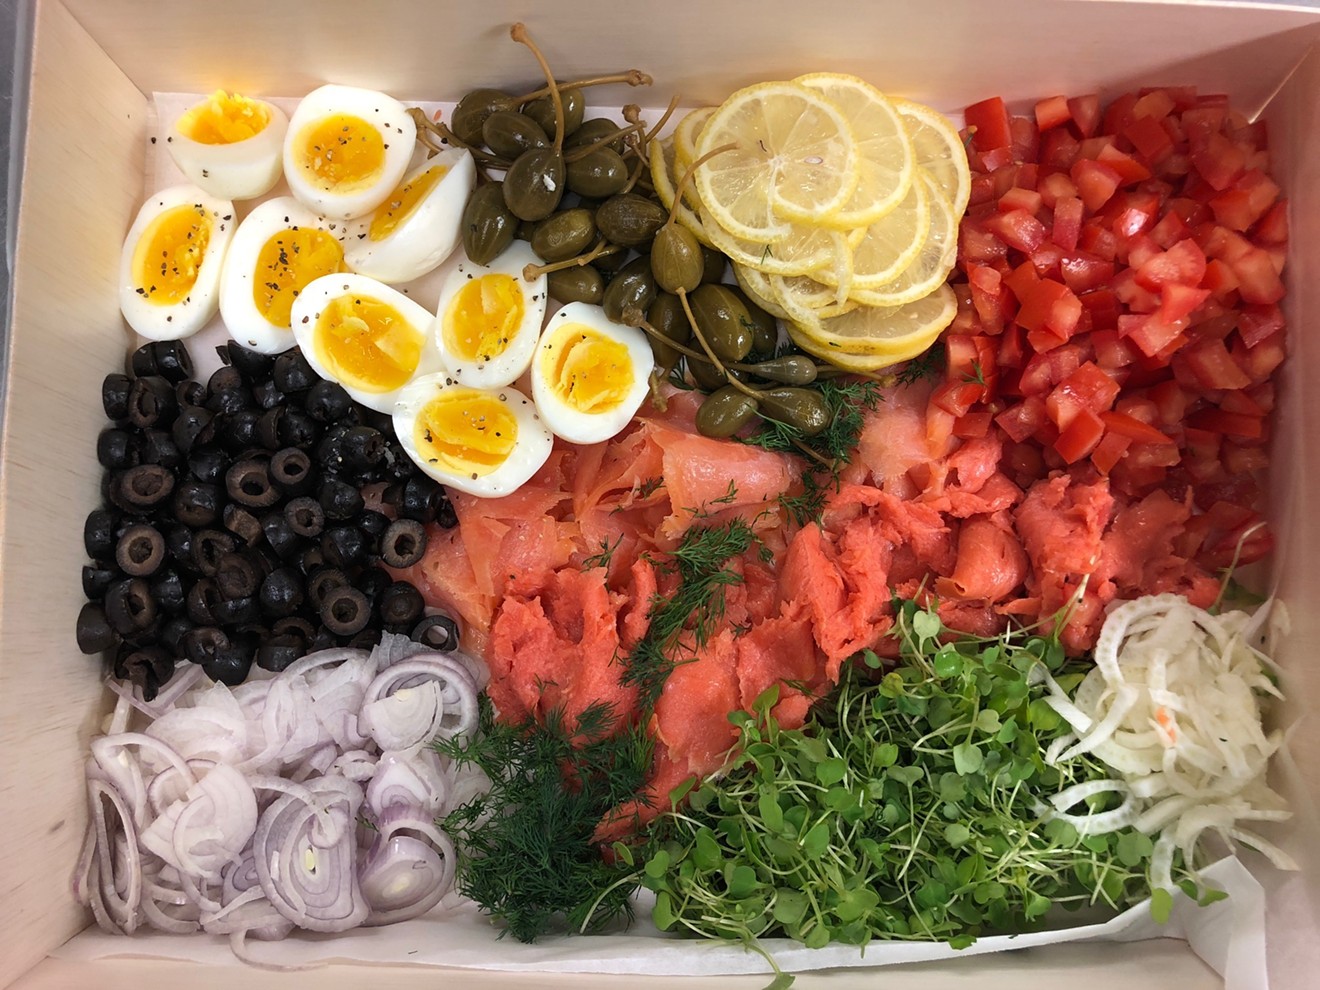 The Lavish Lox station from Jennifer’s Catering and more to-go options around Phoenix.